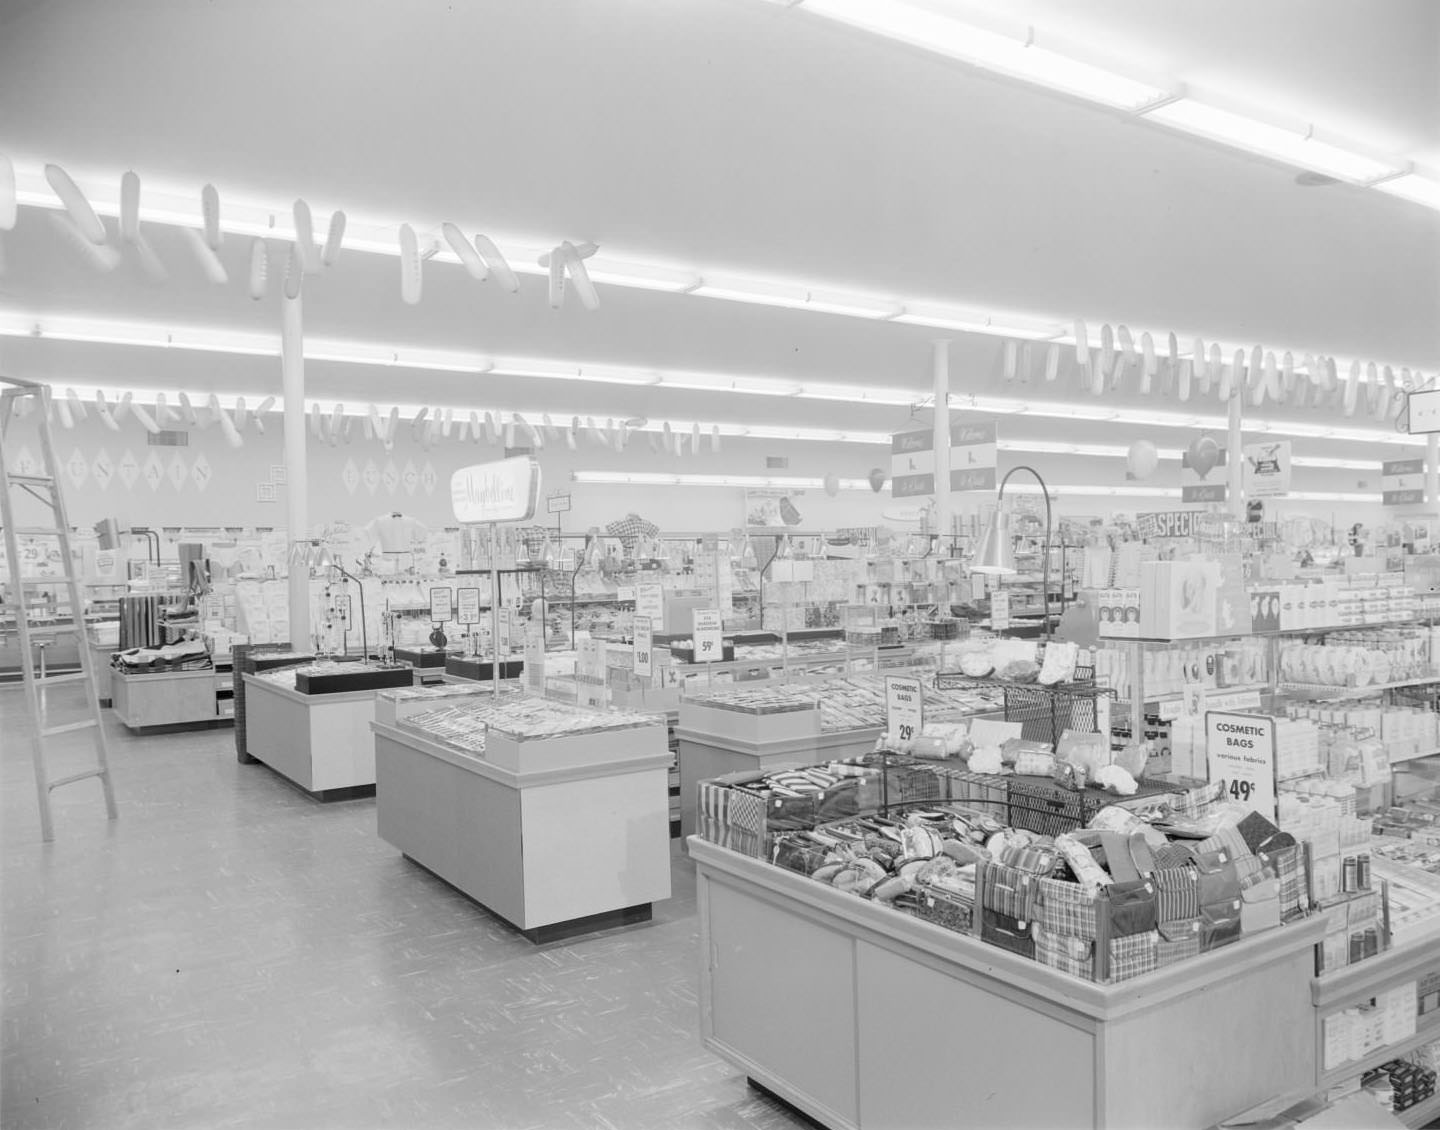 The interior of the Kress store, 1961.